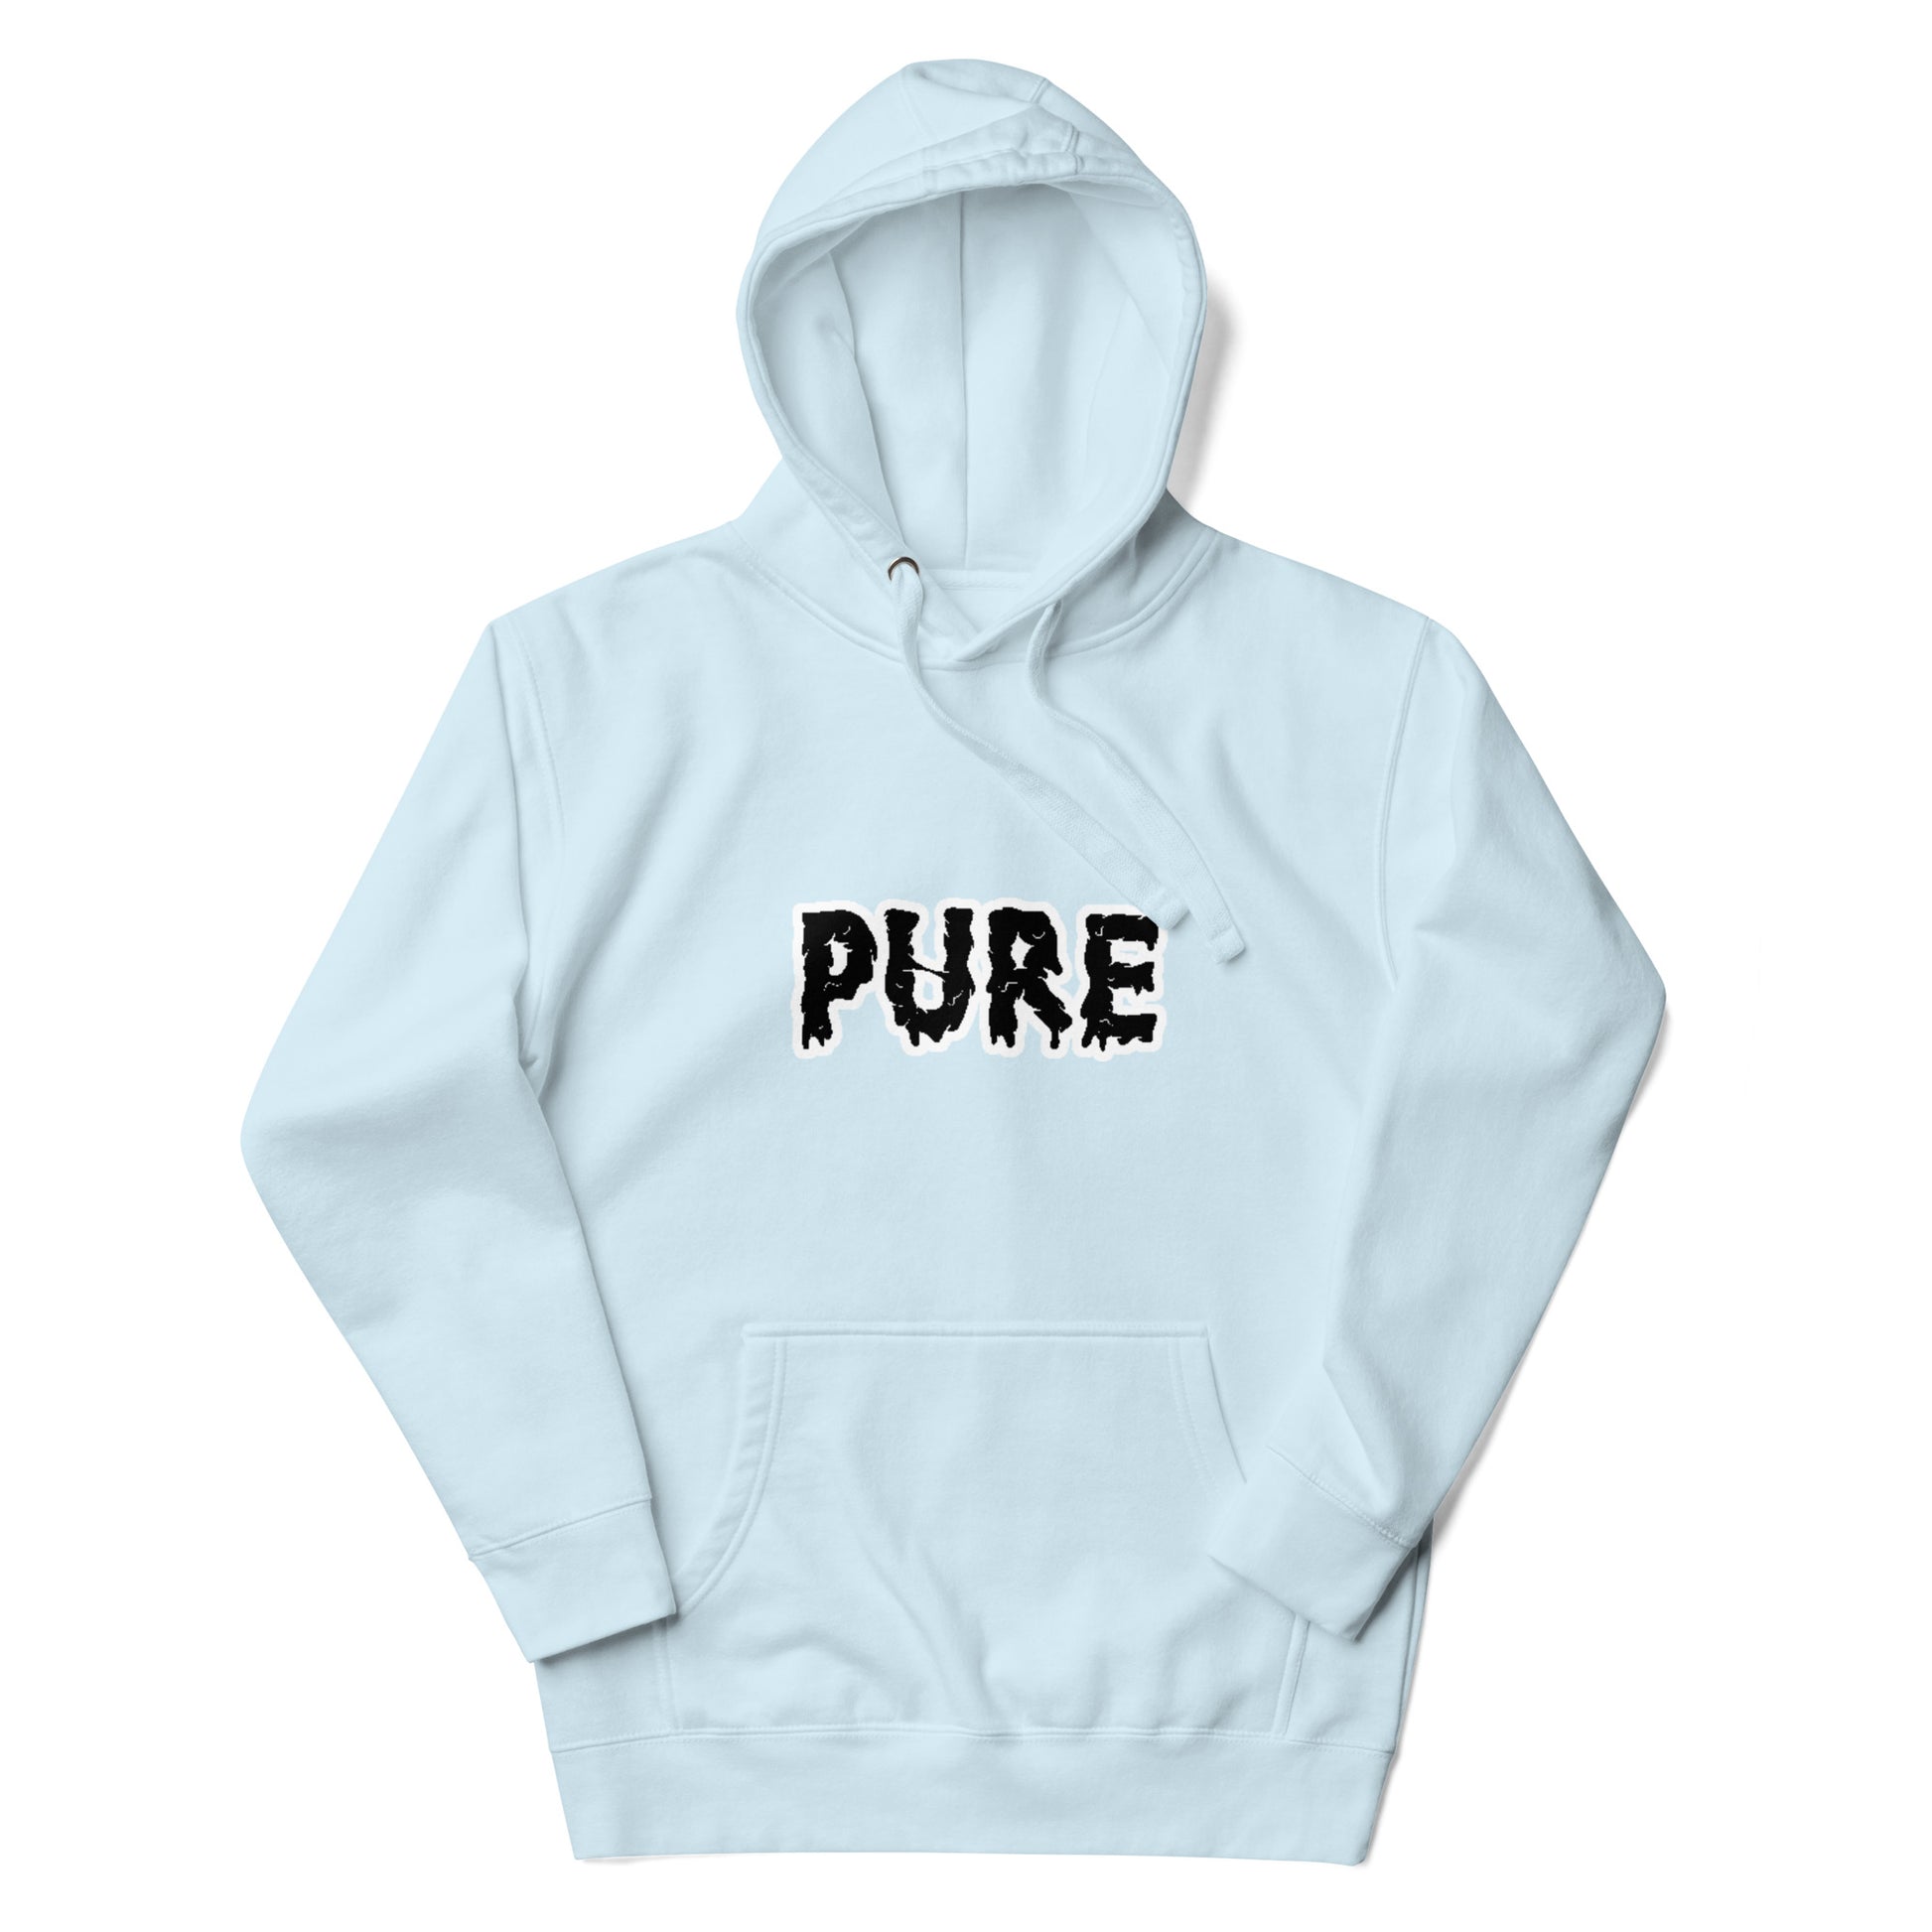 PURE Words Hoodie sky blue, black and white.